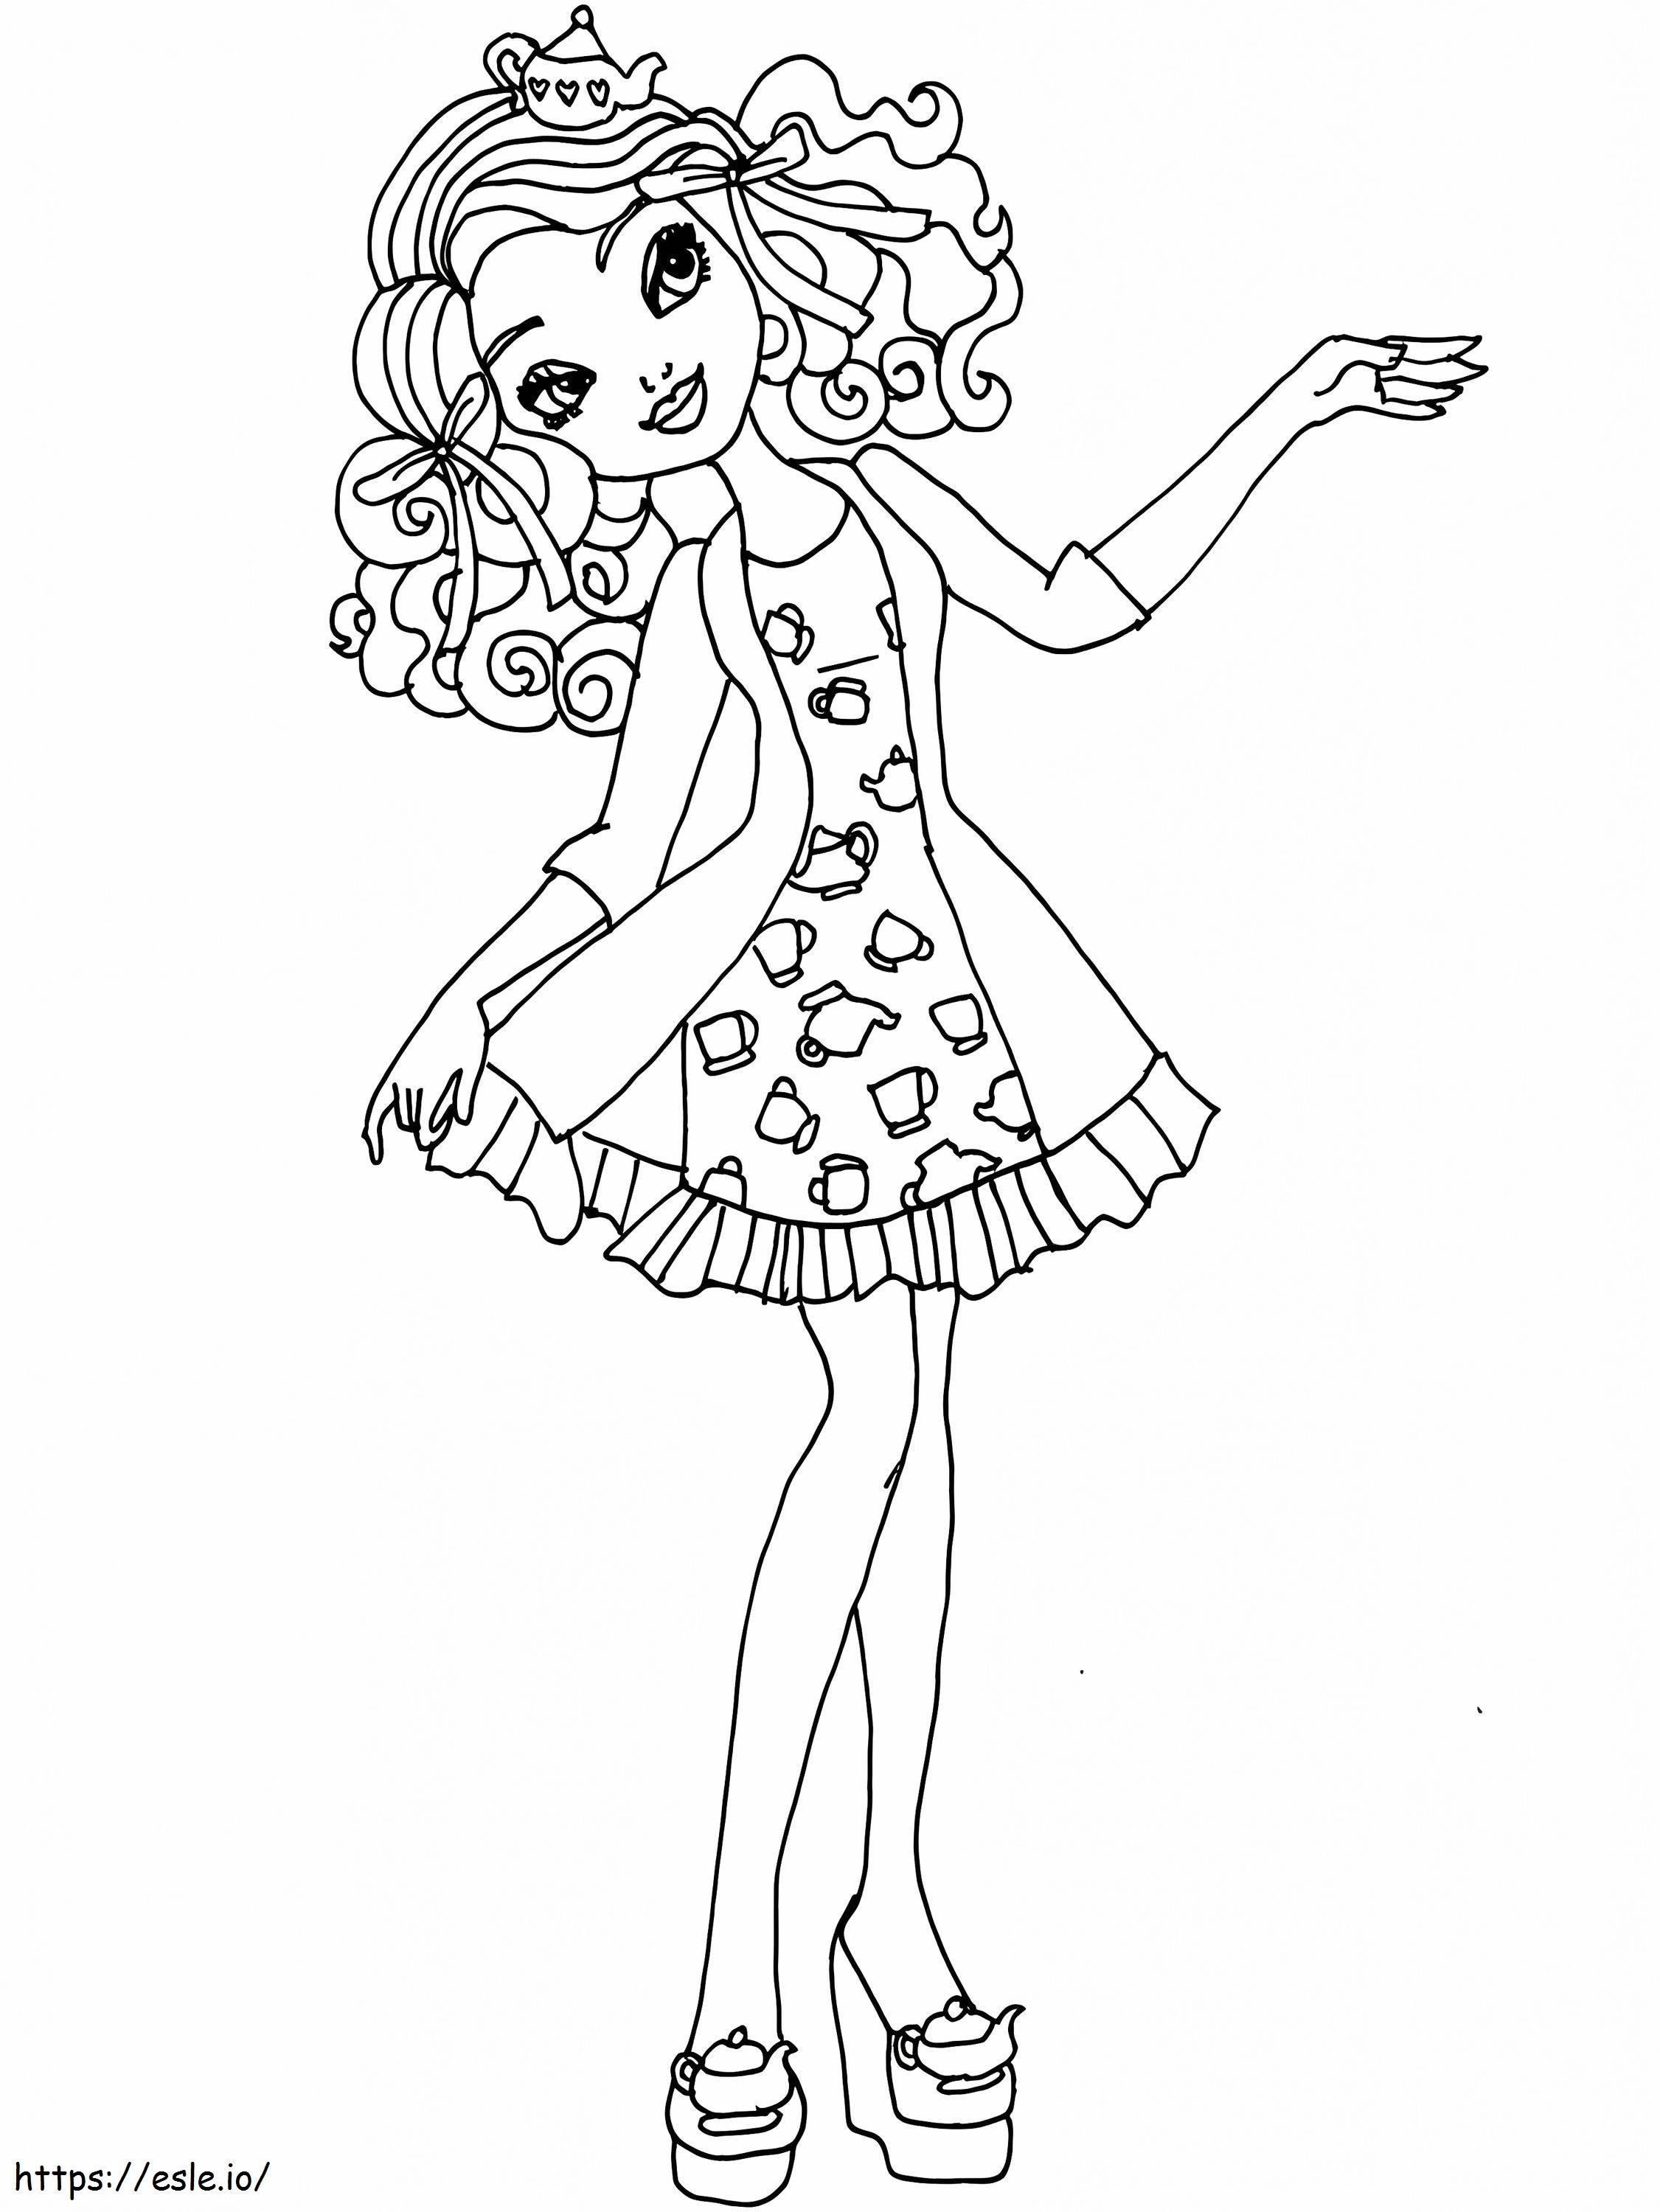 Fastest coloring page